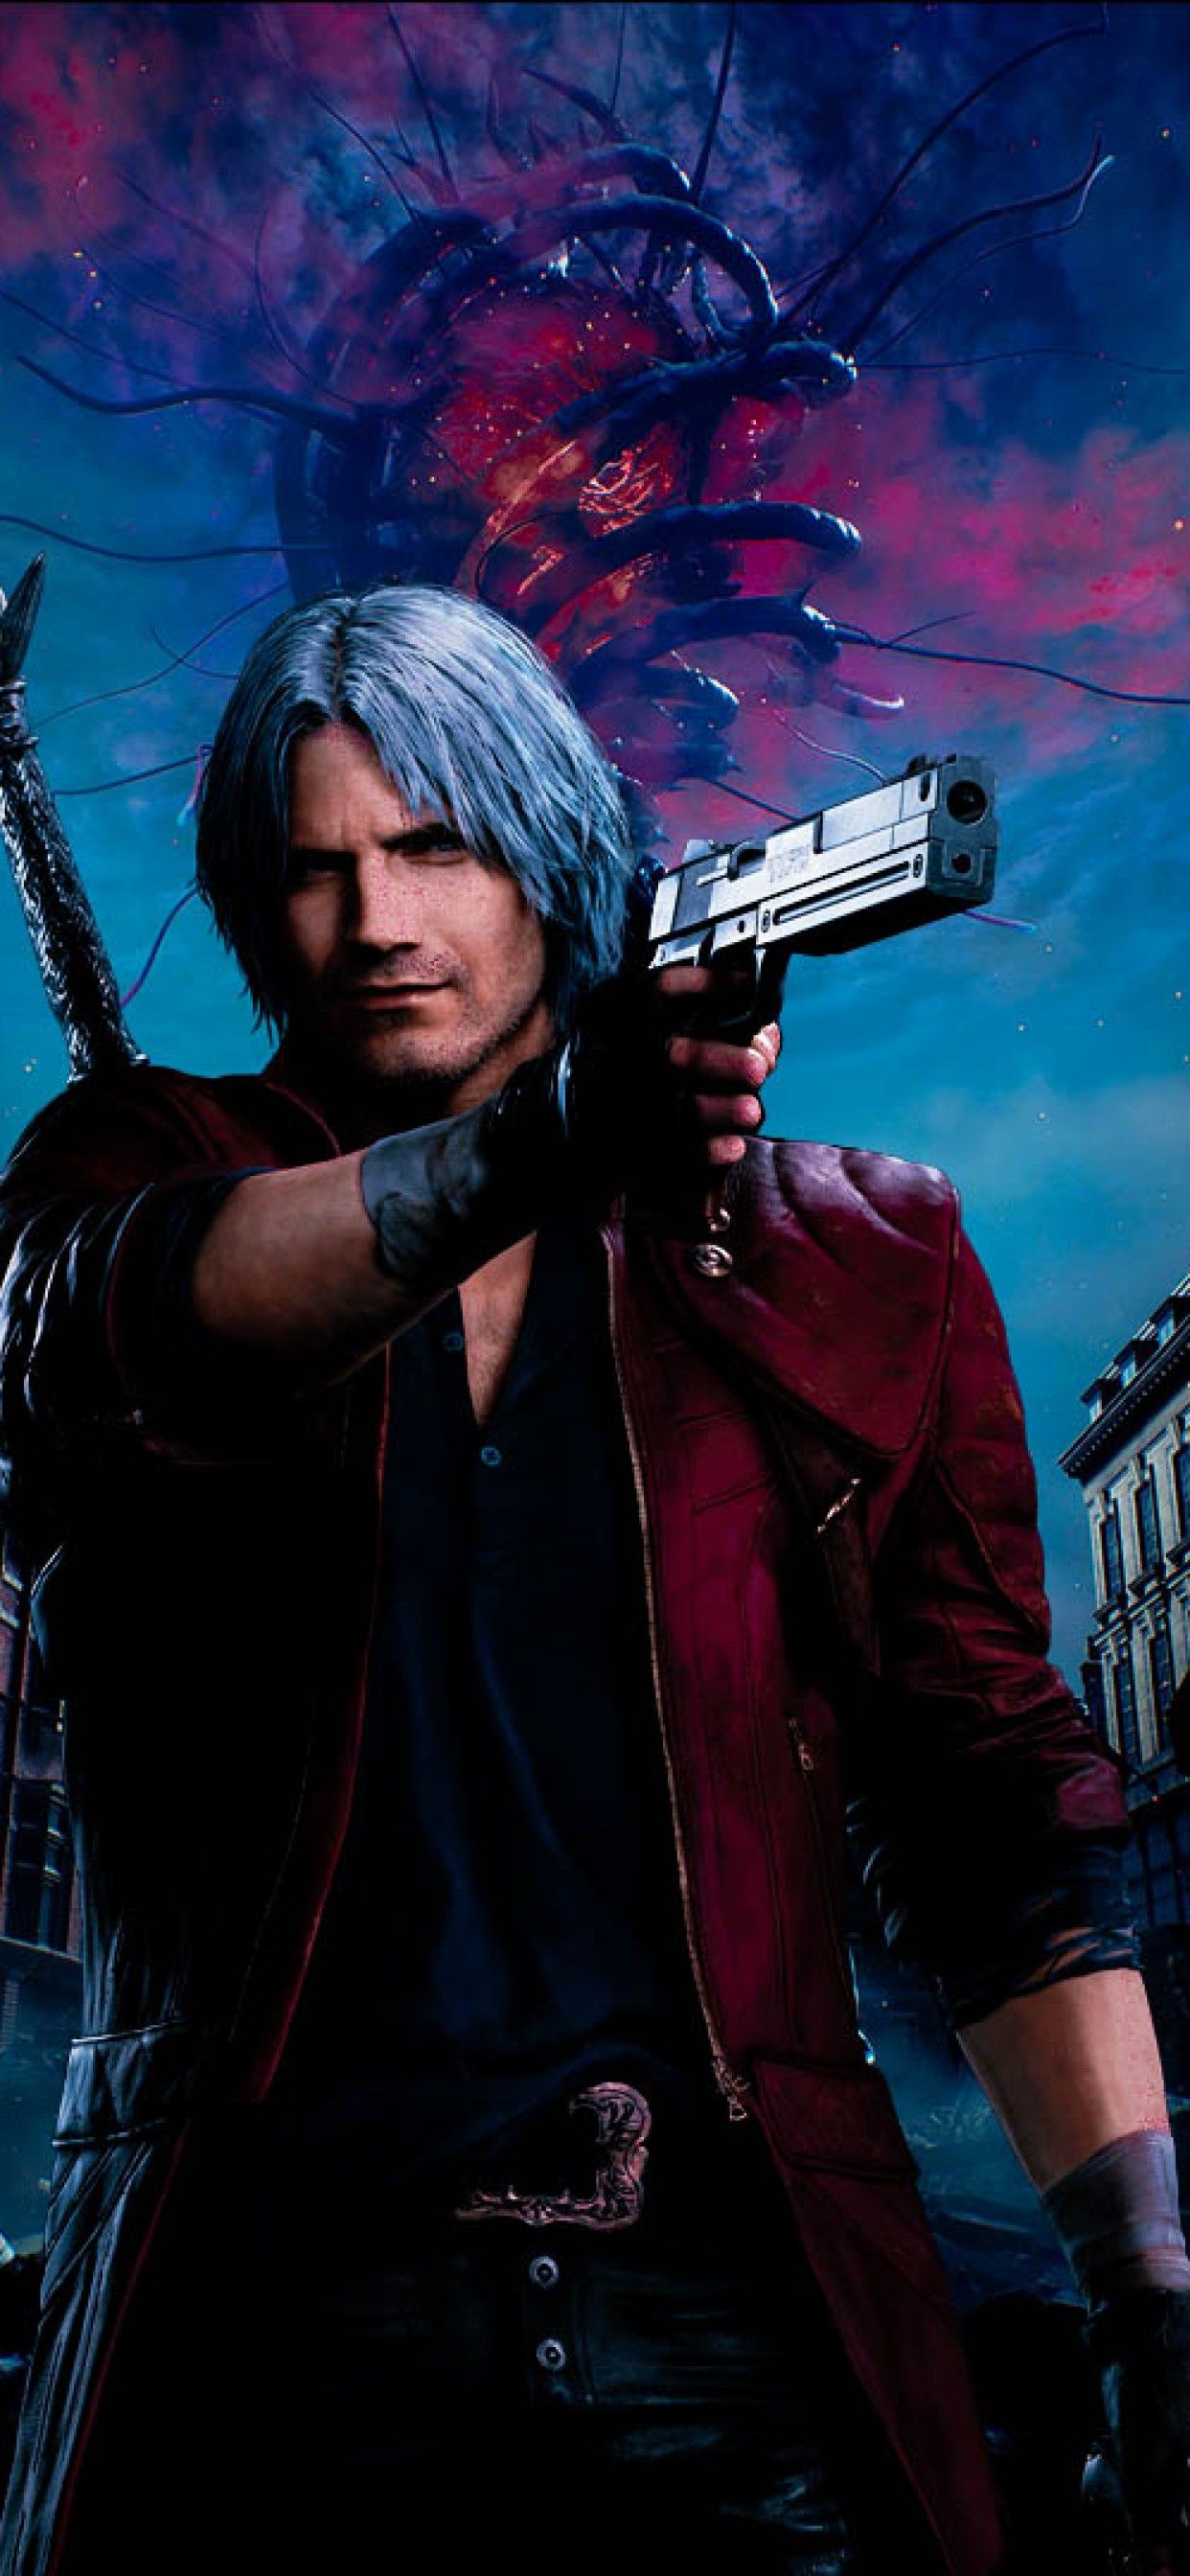 Devil May Cry 5 iPhone XS Max Wallpaper Download